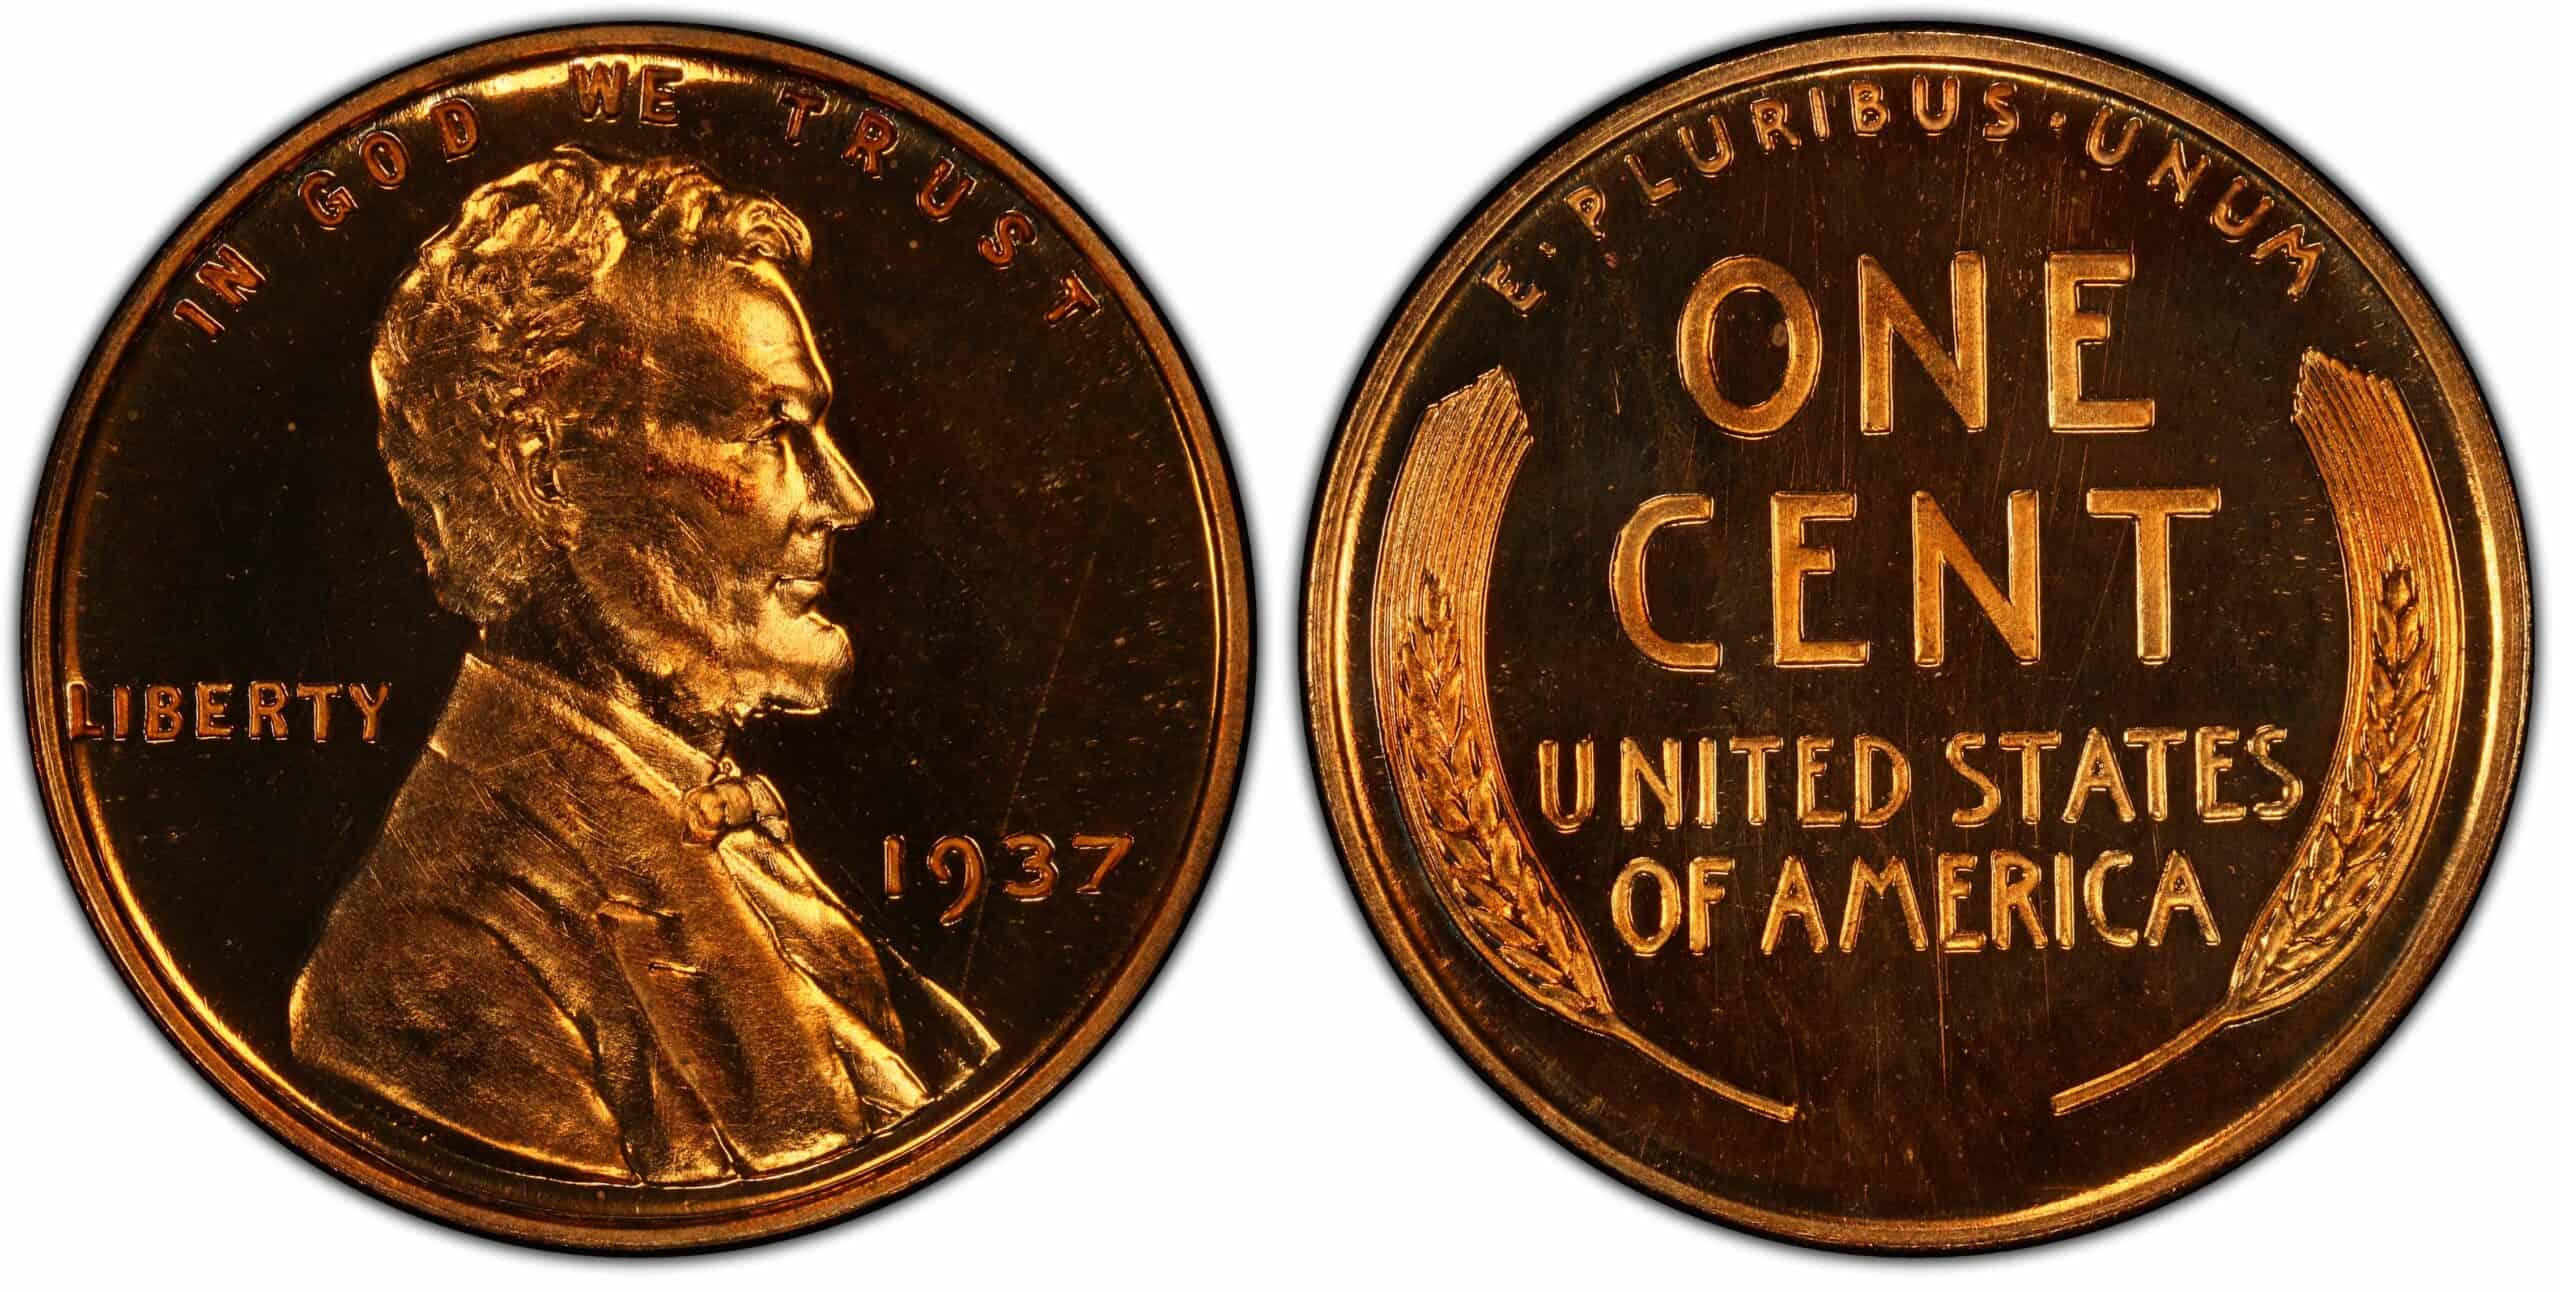 The 1937 Proof Wheat Penny